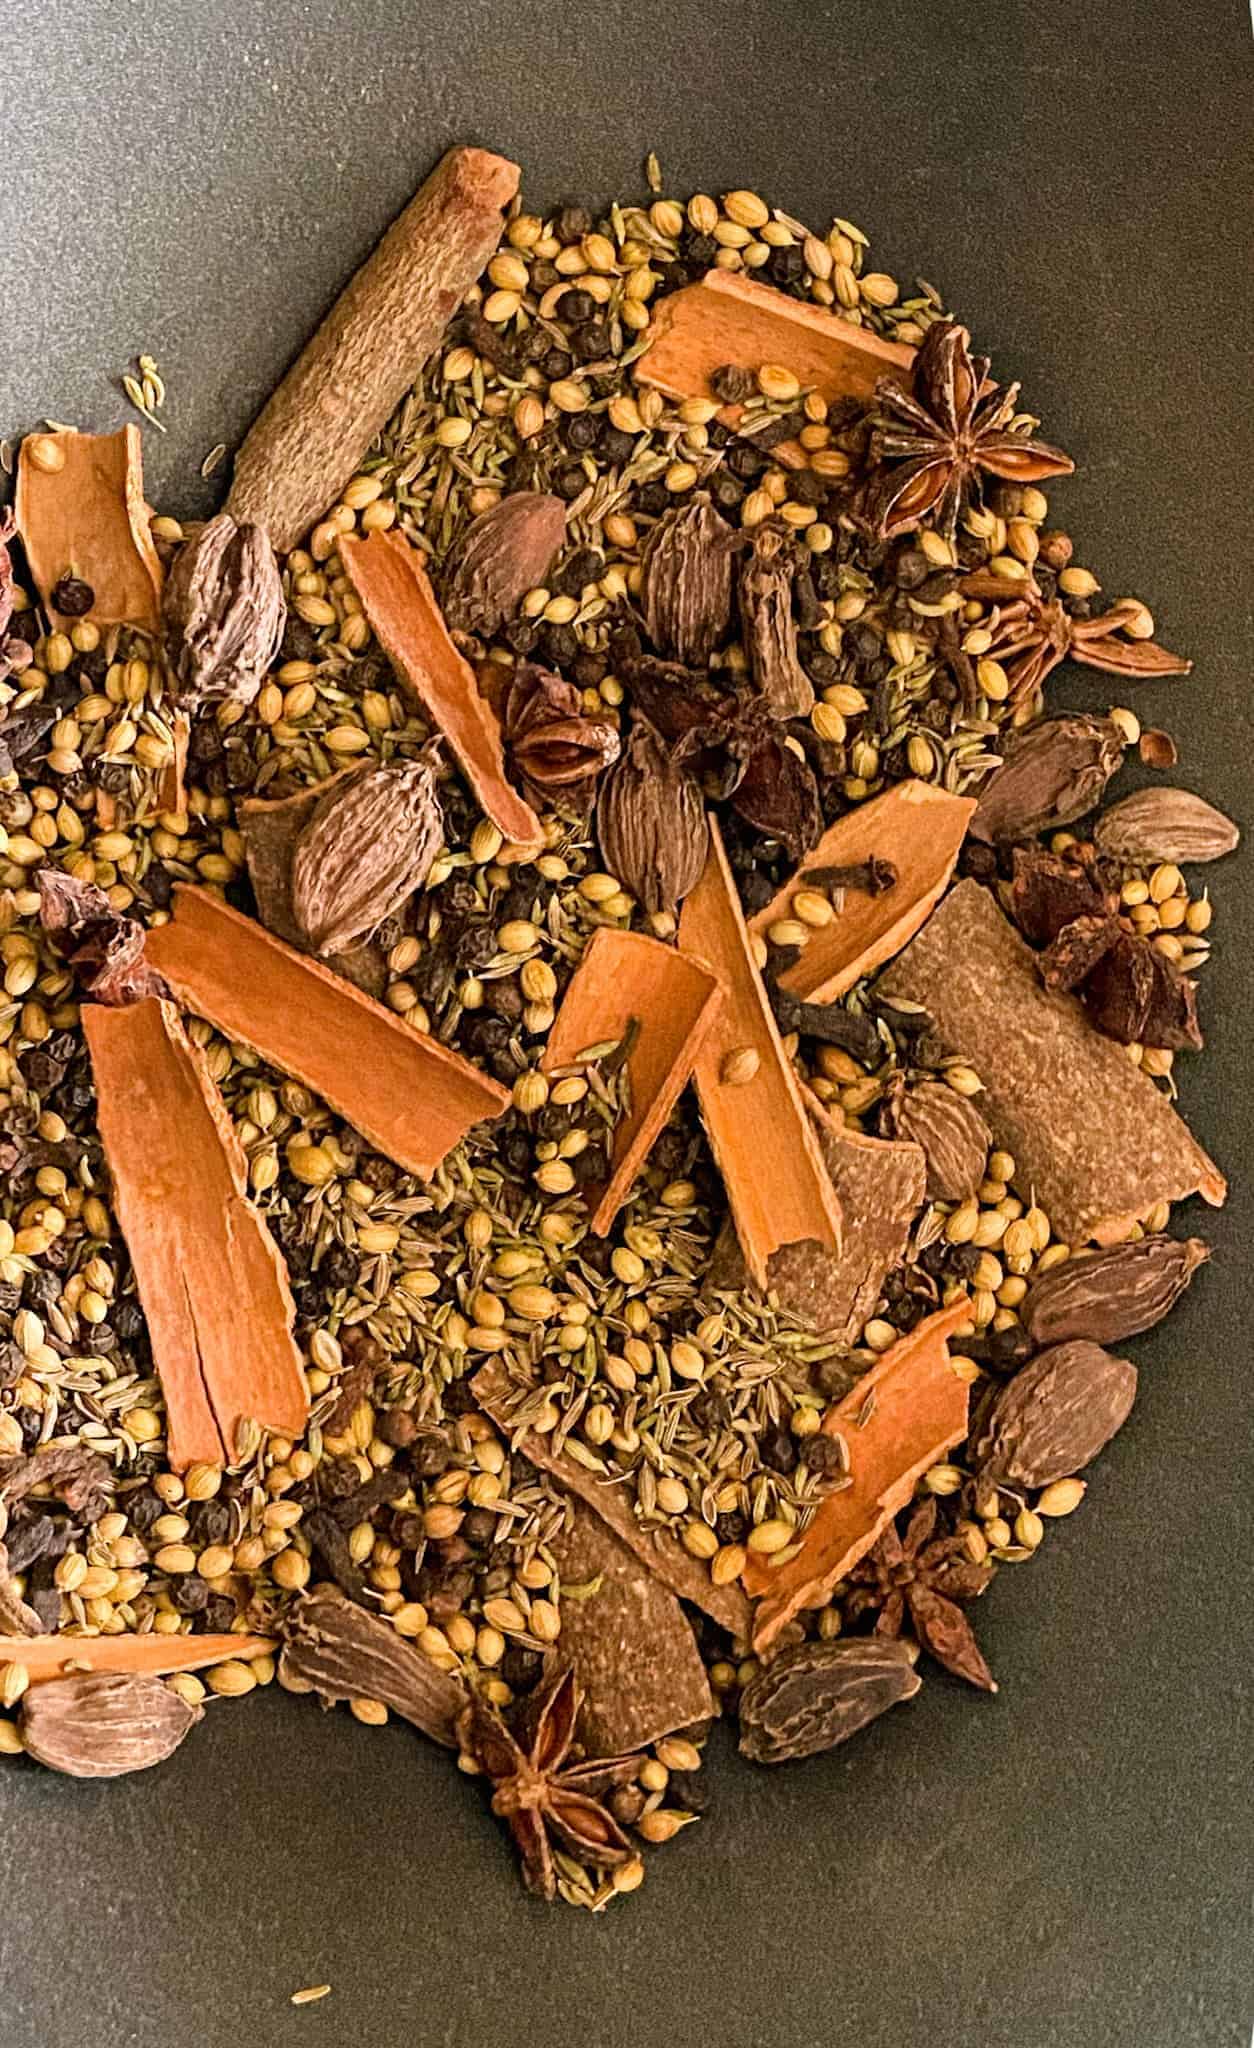 Image of whole spices